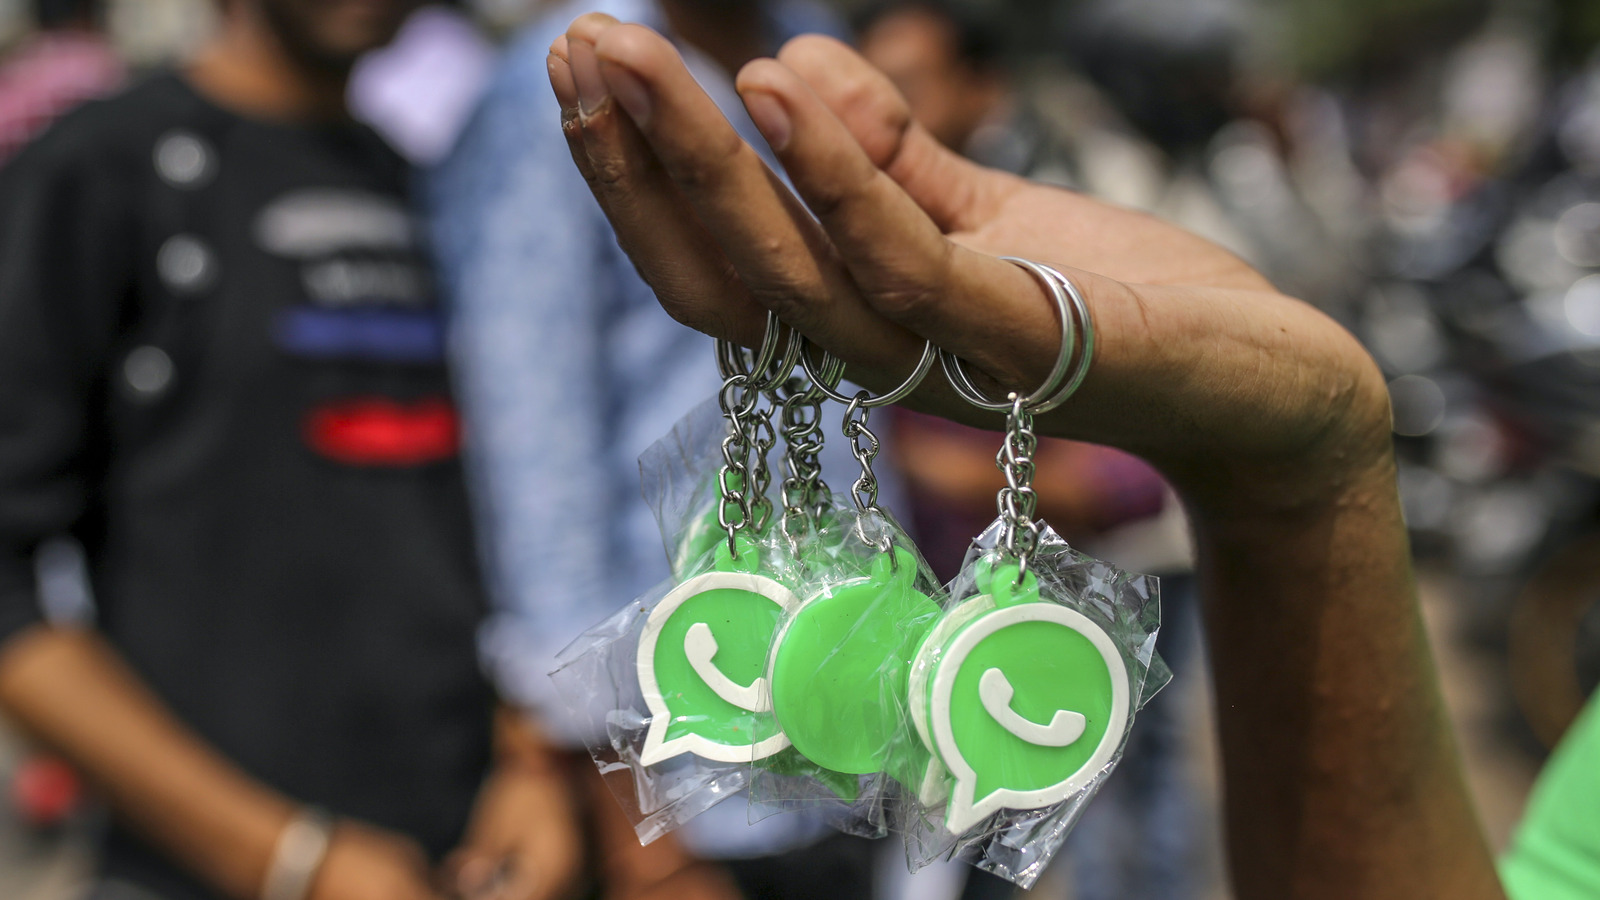 WhatsApp Is Getting Rid Of One Of Its Most Annoying Restrictions